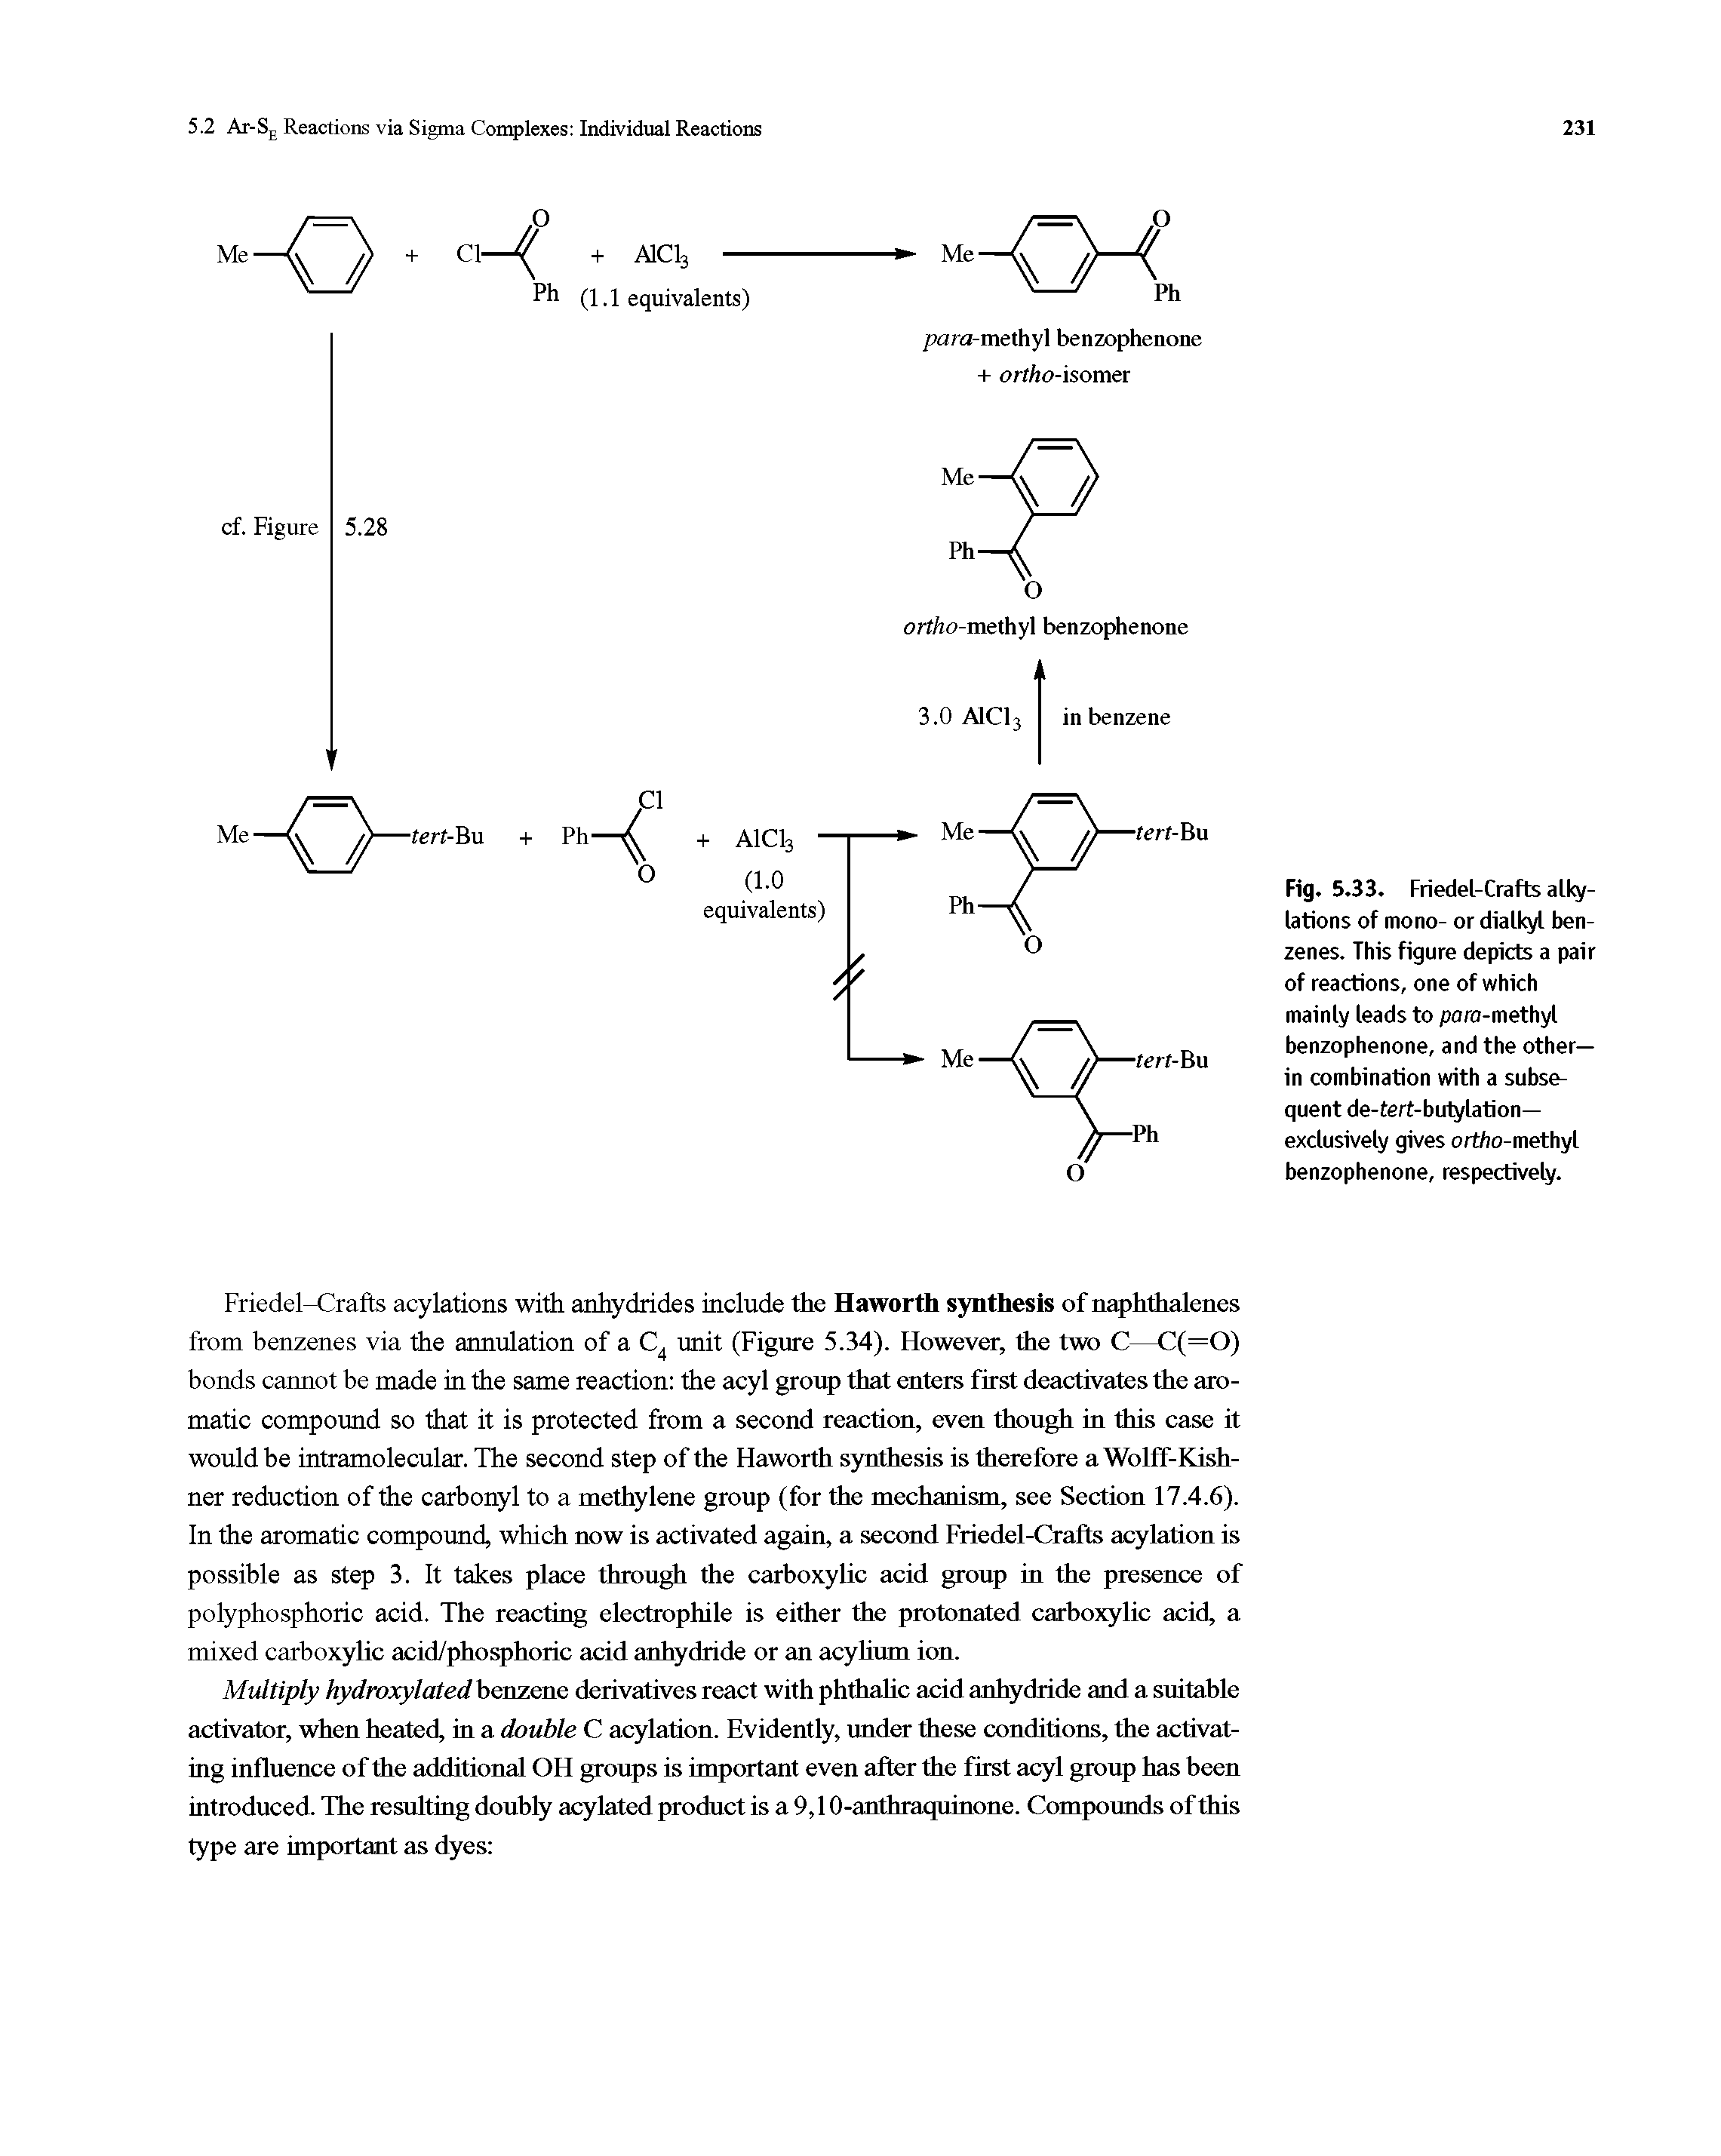 Fig. 5.33. Friedel-Crafts alkylations of mono- or dialkyl benzenes. This figure depicts a pair of reactions, one of which mainly leads to para-methyl benzophenone, and the other-in combination with a subsequent de-tert-bulylation— exclusively gives ortho-methyl benzophenone, respectively.